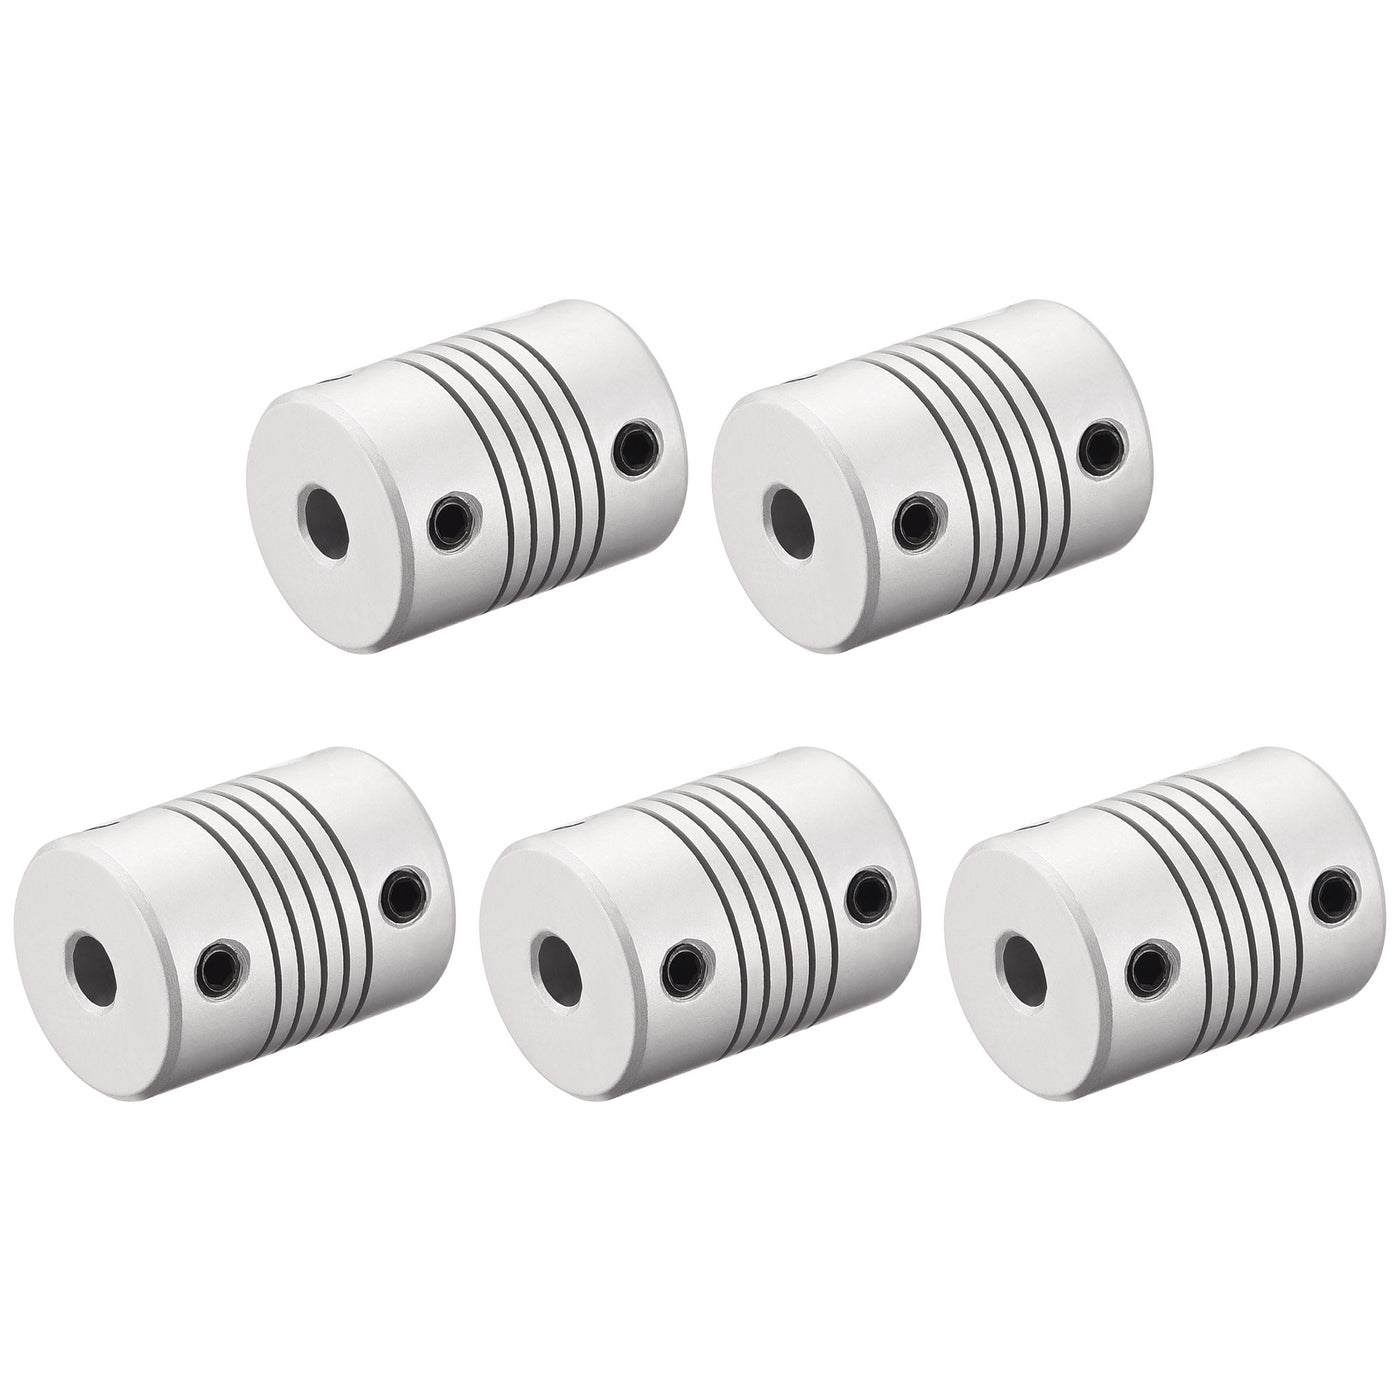 uxcell Uxcell 5mm to 10mm Aluminum Alloy Shaft Coupling Flexible Coupler L25xD19 Silver,5pcs